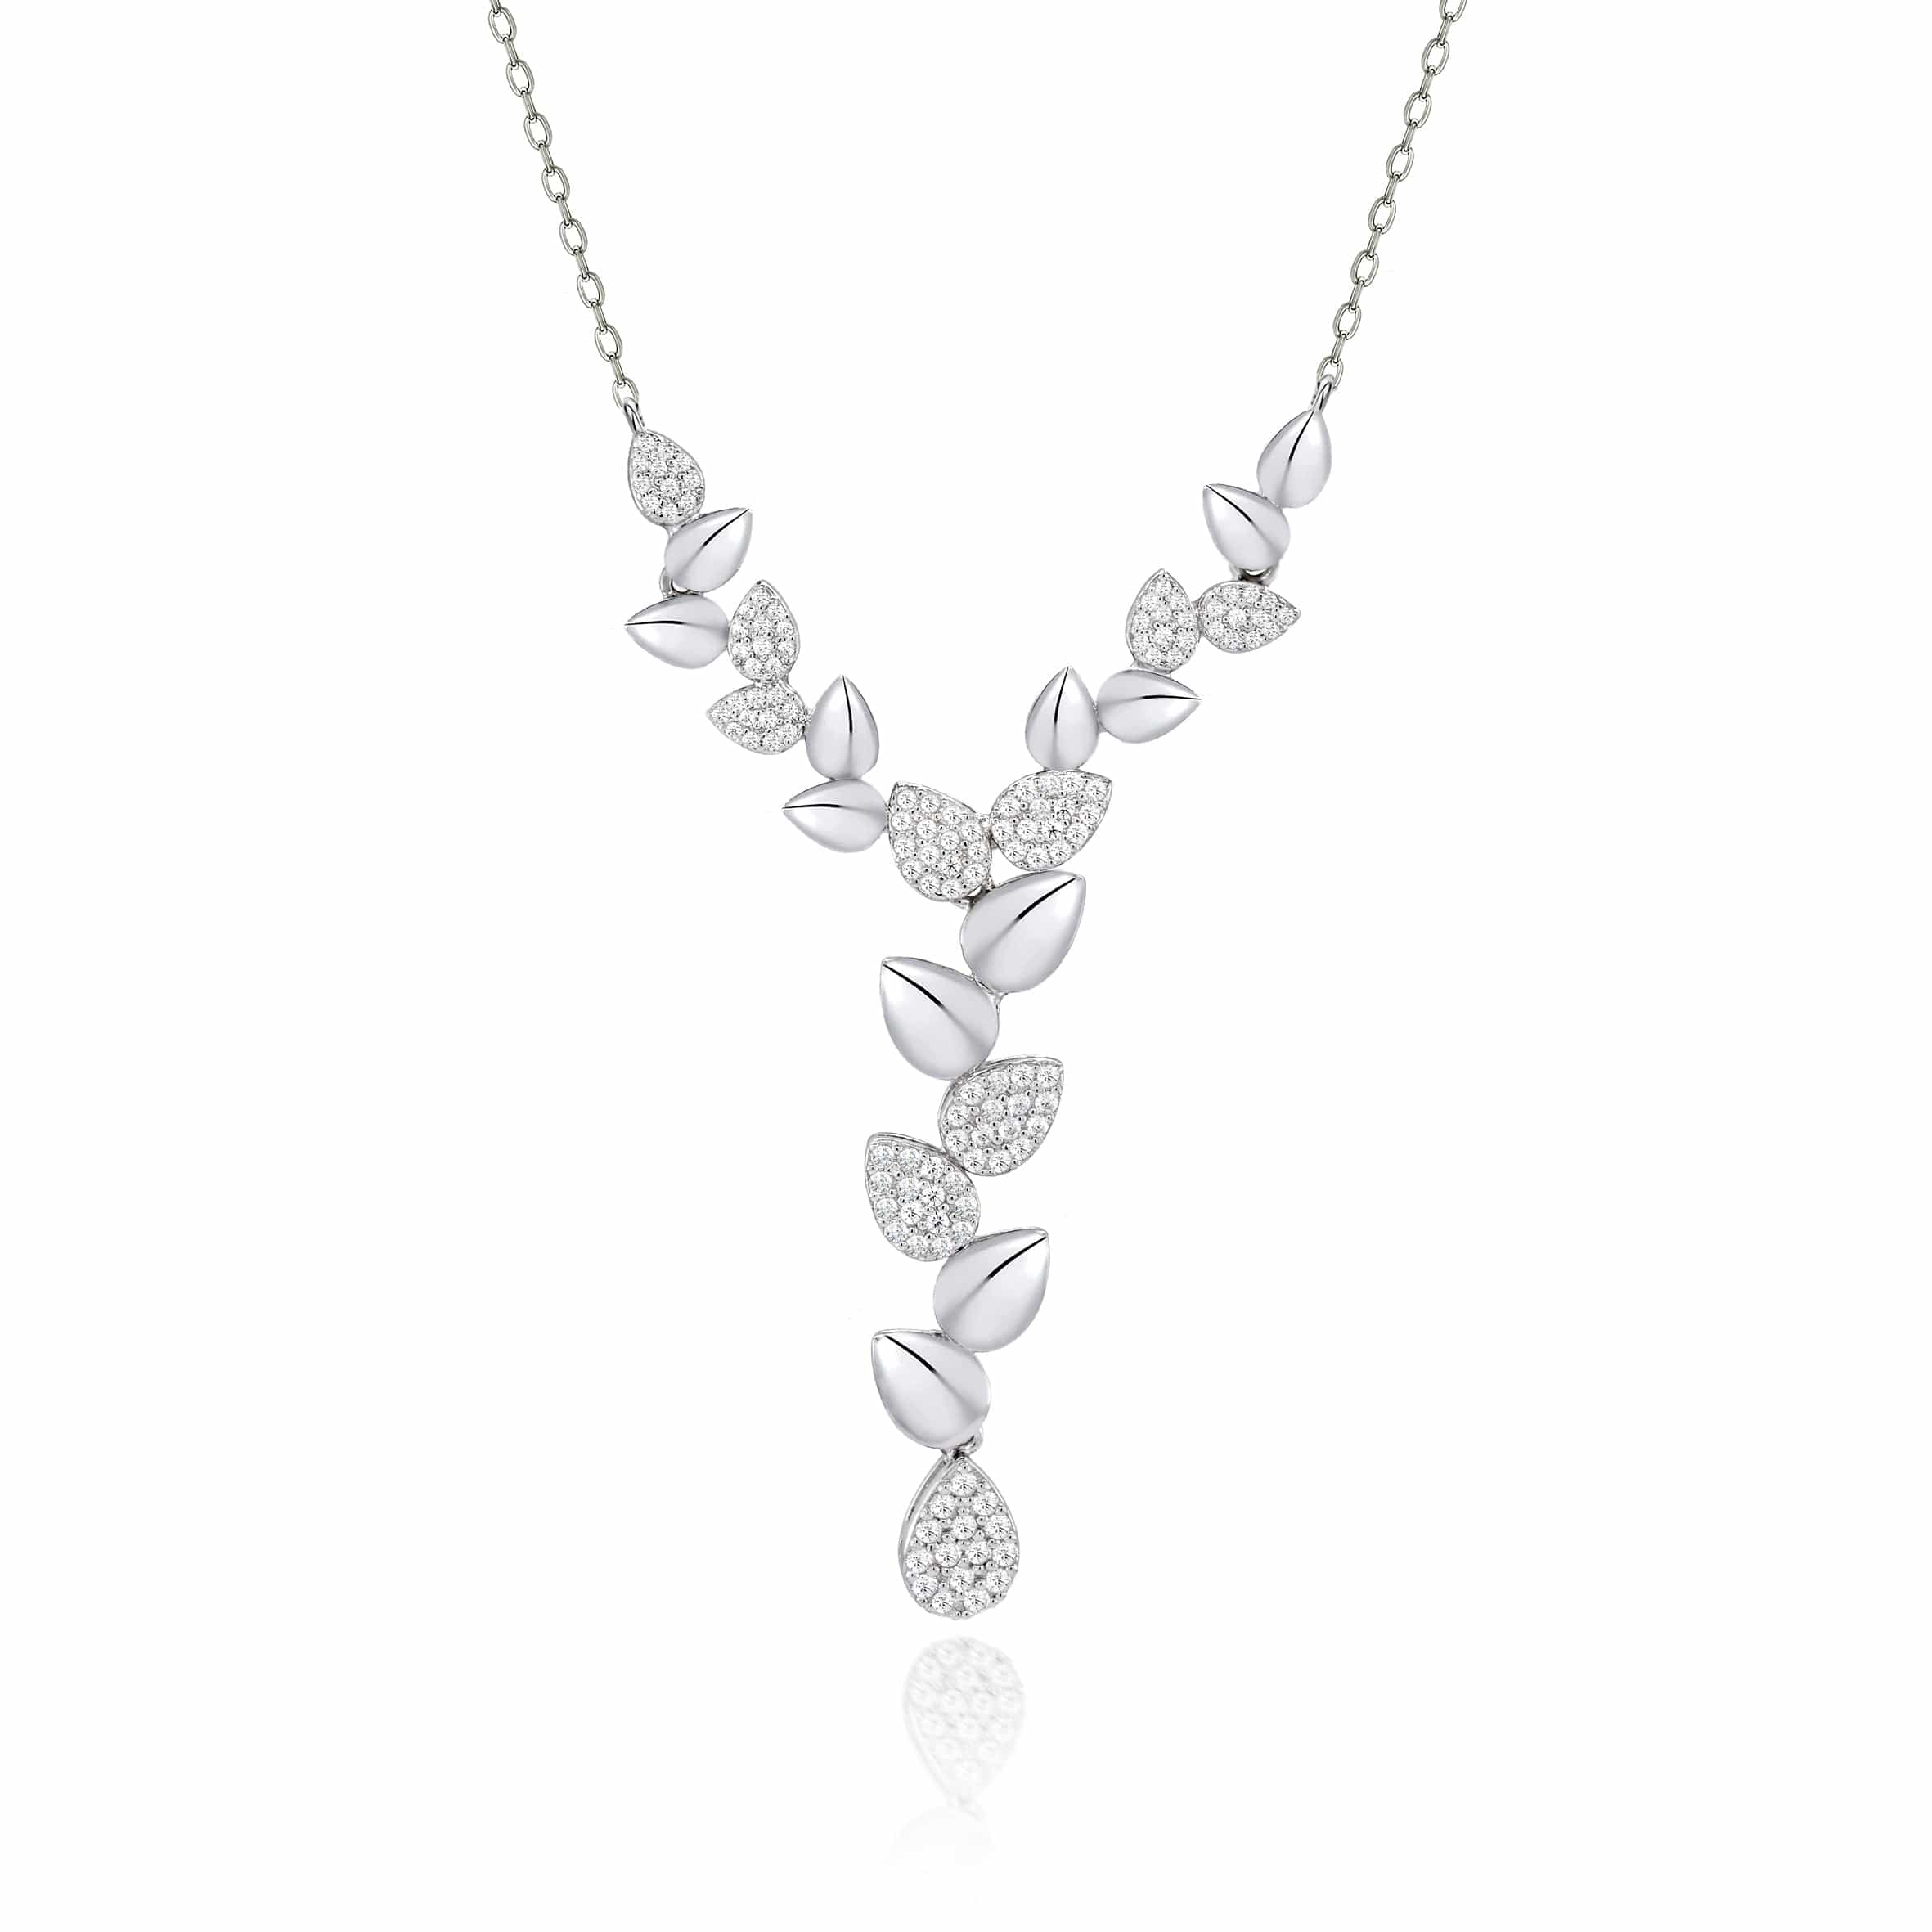 Lynora Silver Necklace Sterling Silver / Clear Silver Petal V Shaped Diamond Necklace